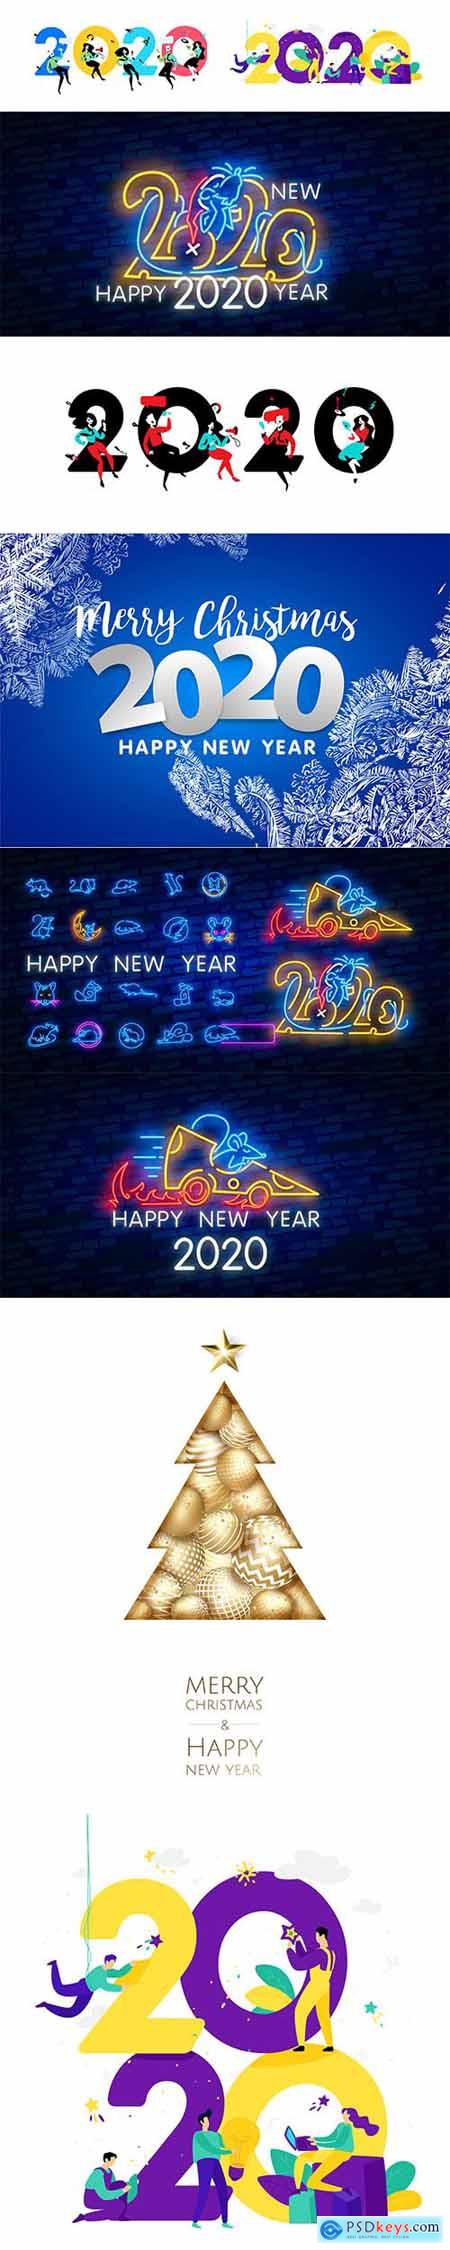 Merry Christmas and Happy New Year 2020 Illustrations Set 1